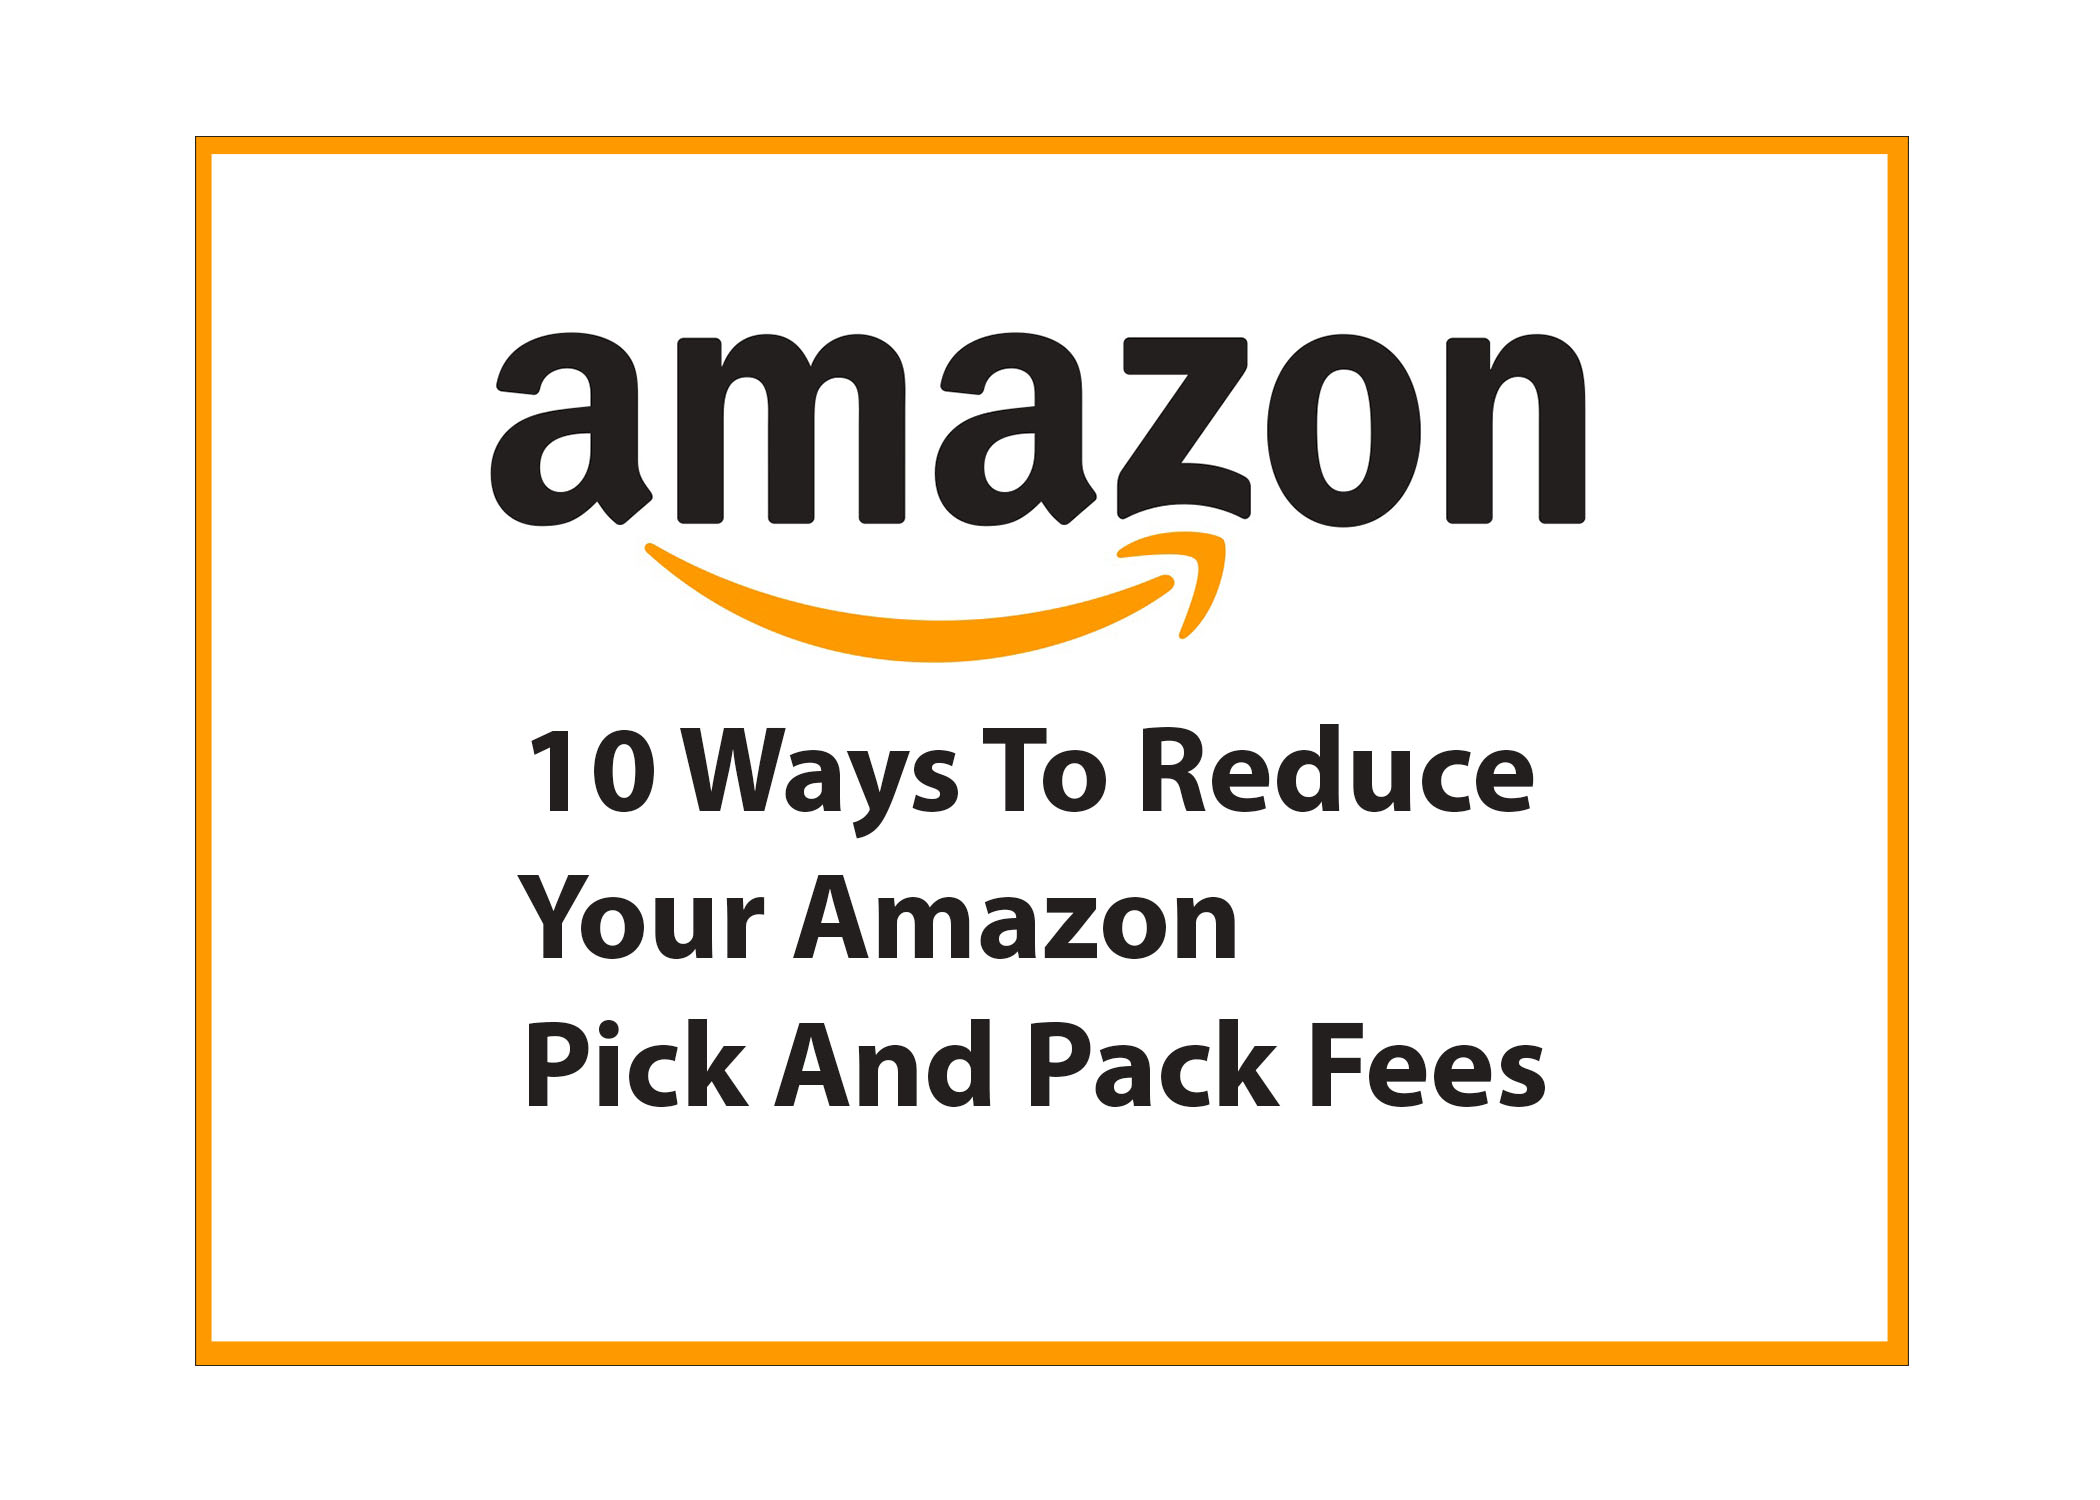 10 Ways To Reduce Your Amazon Pick And Pack Fees